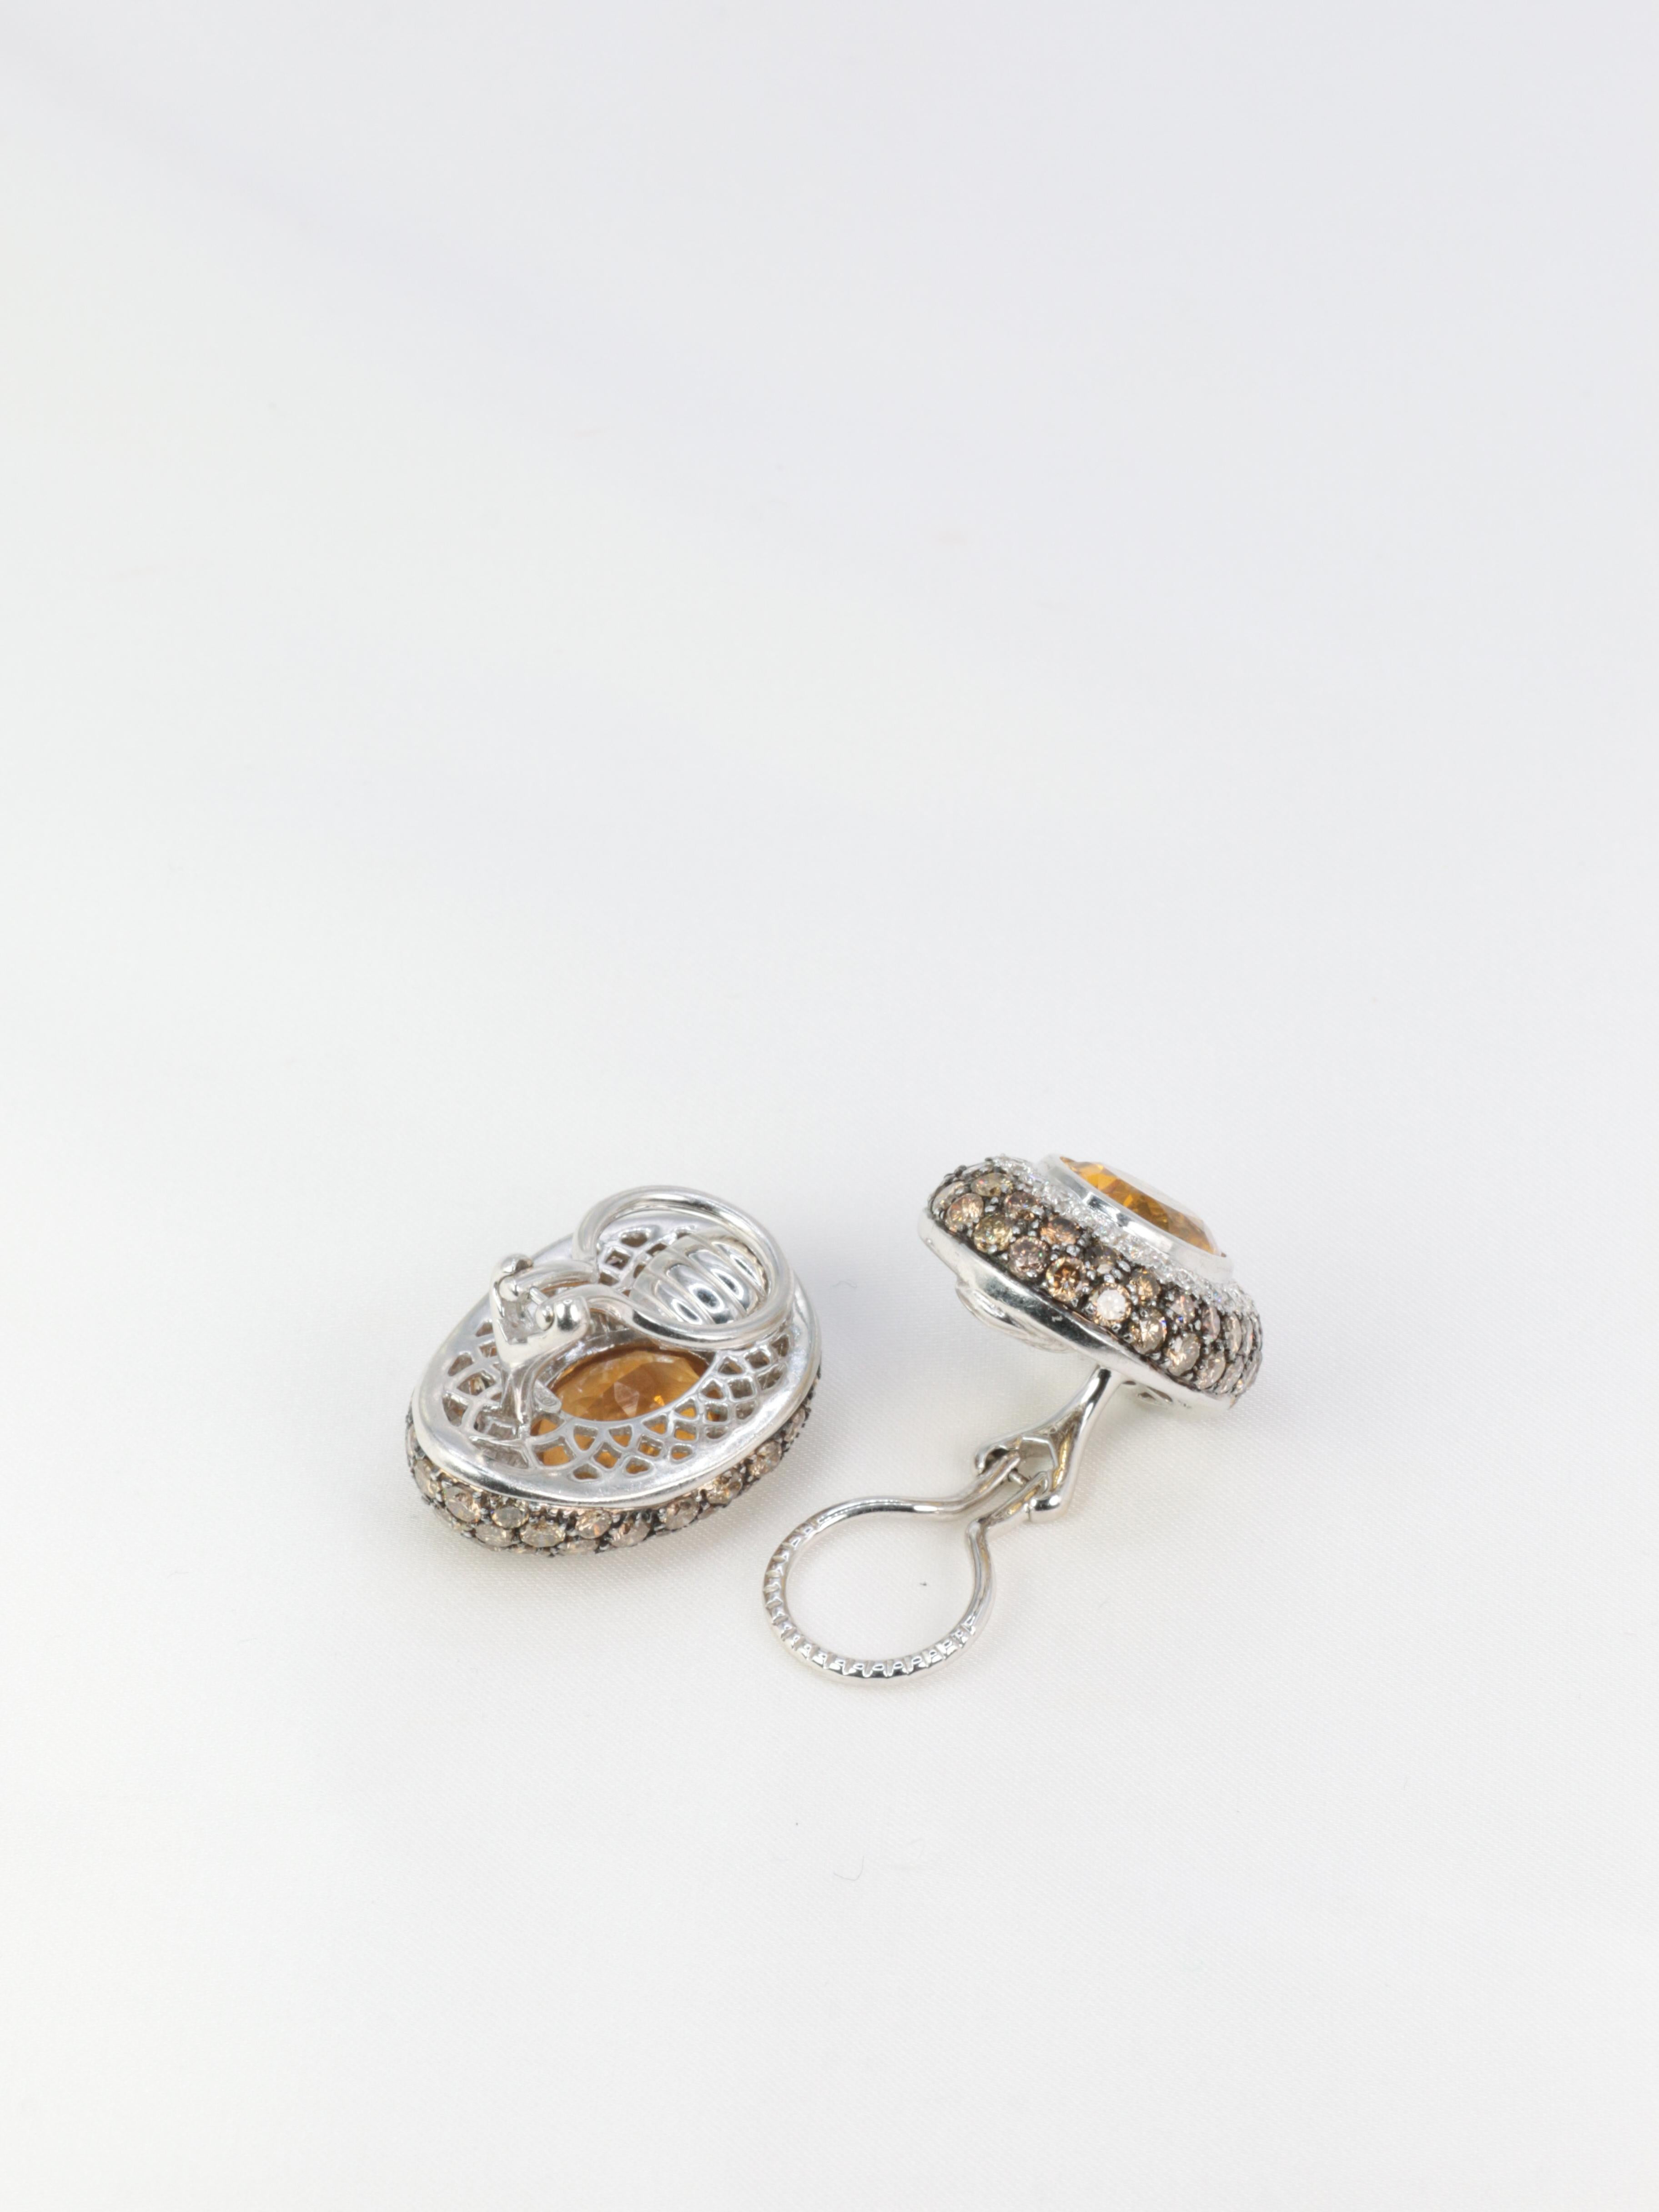 Pair of Gold, Citrines, White and Champagne Diamonds Earrings For Sale 1